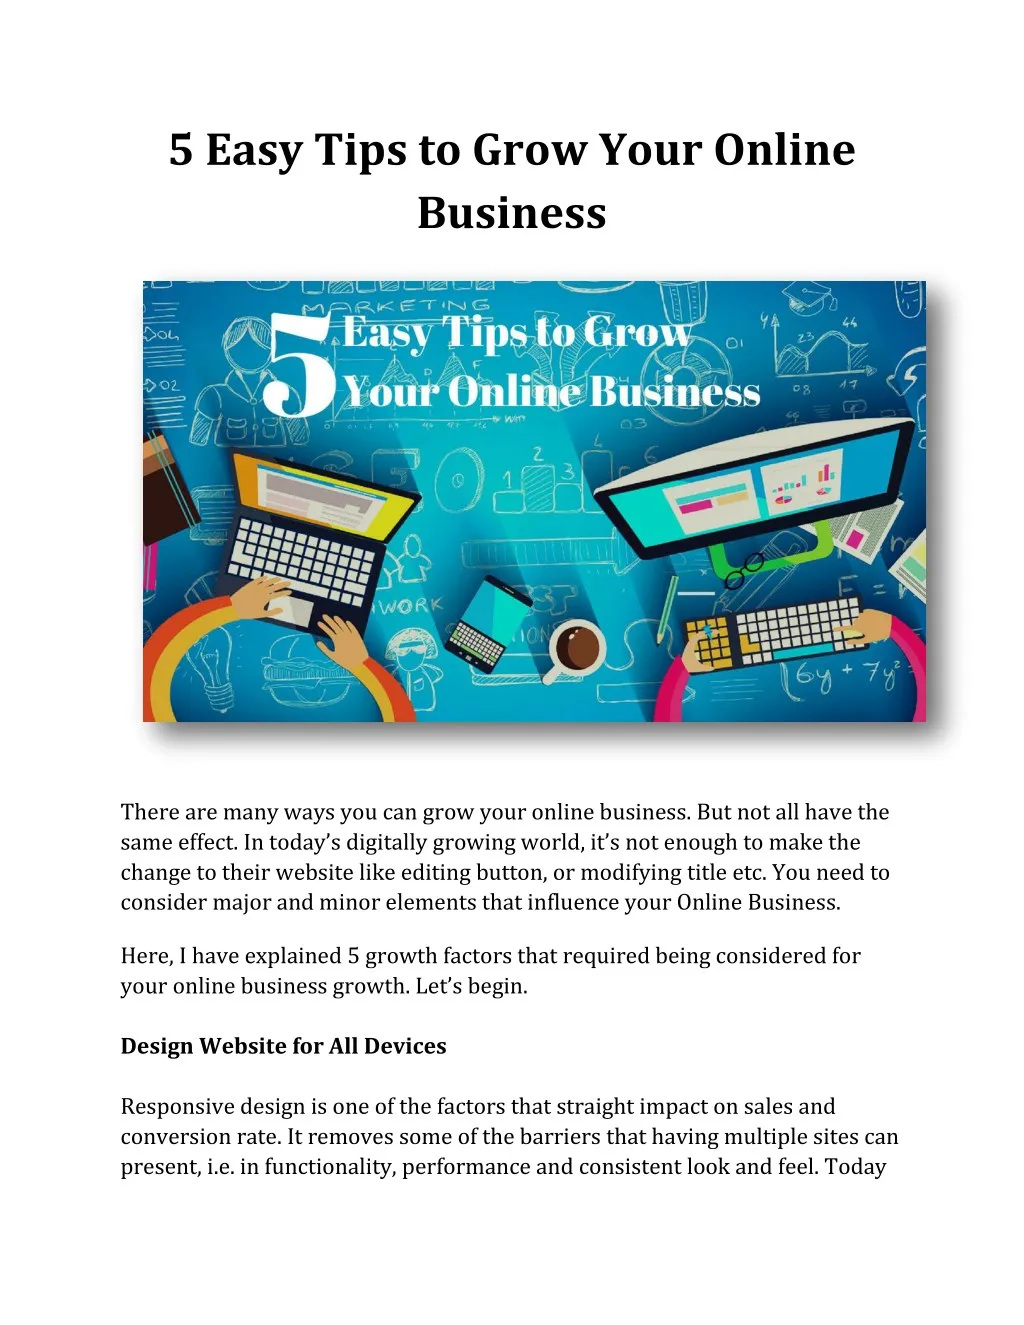 5 Easy Tips to Grow Your Online Business